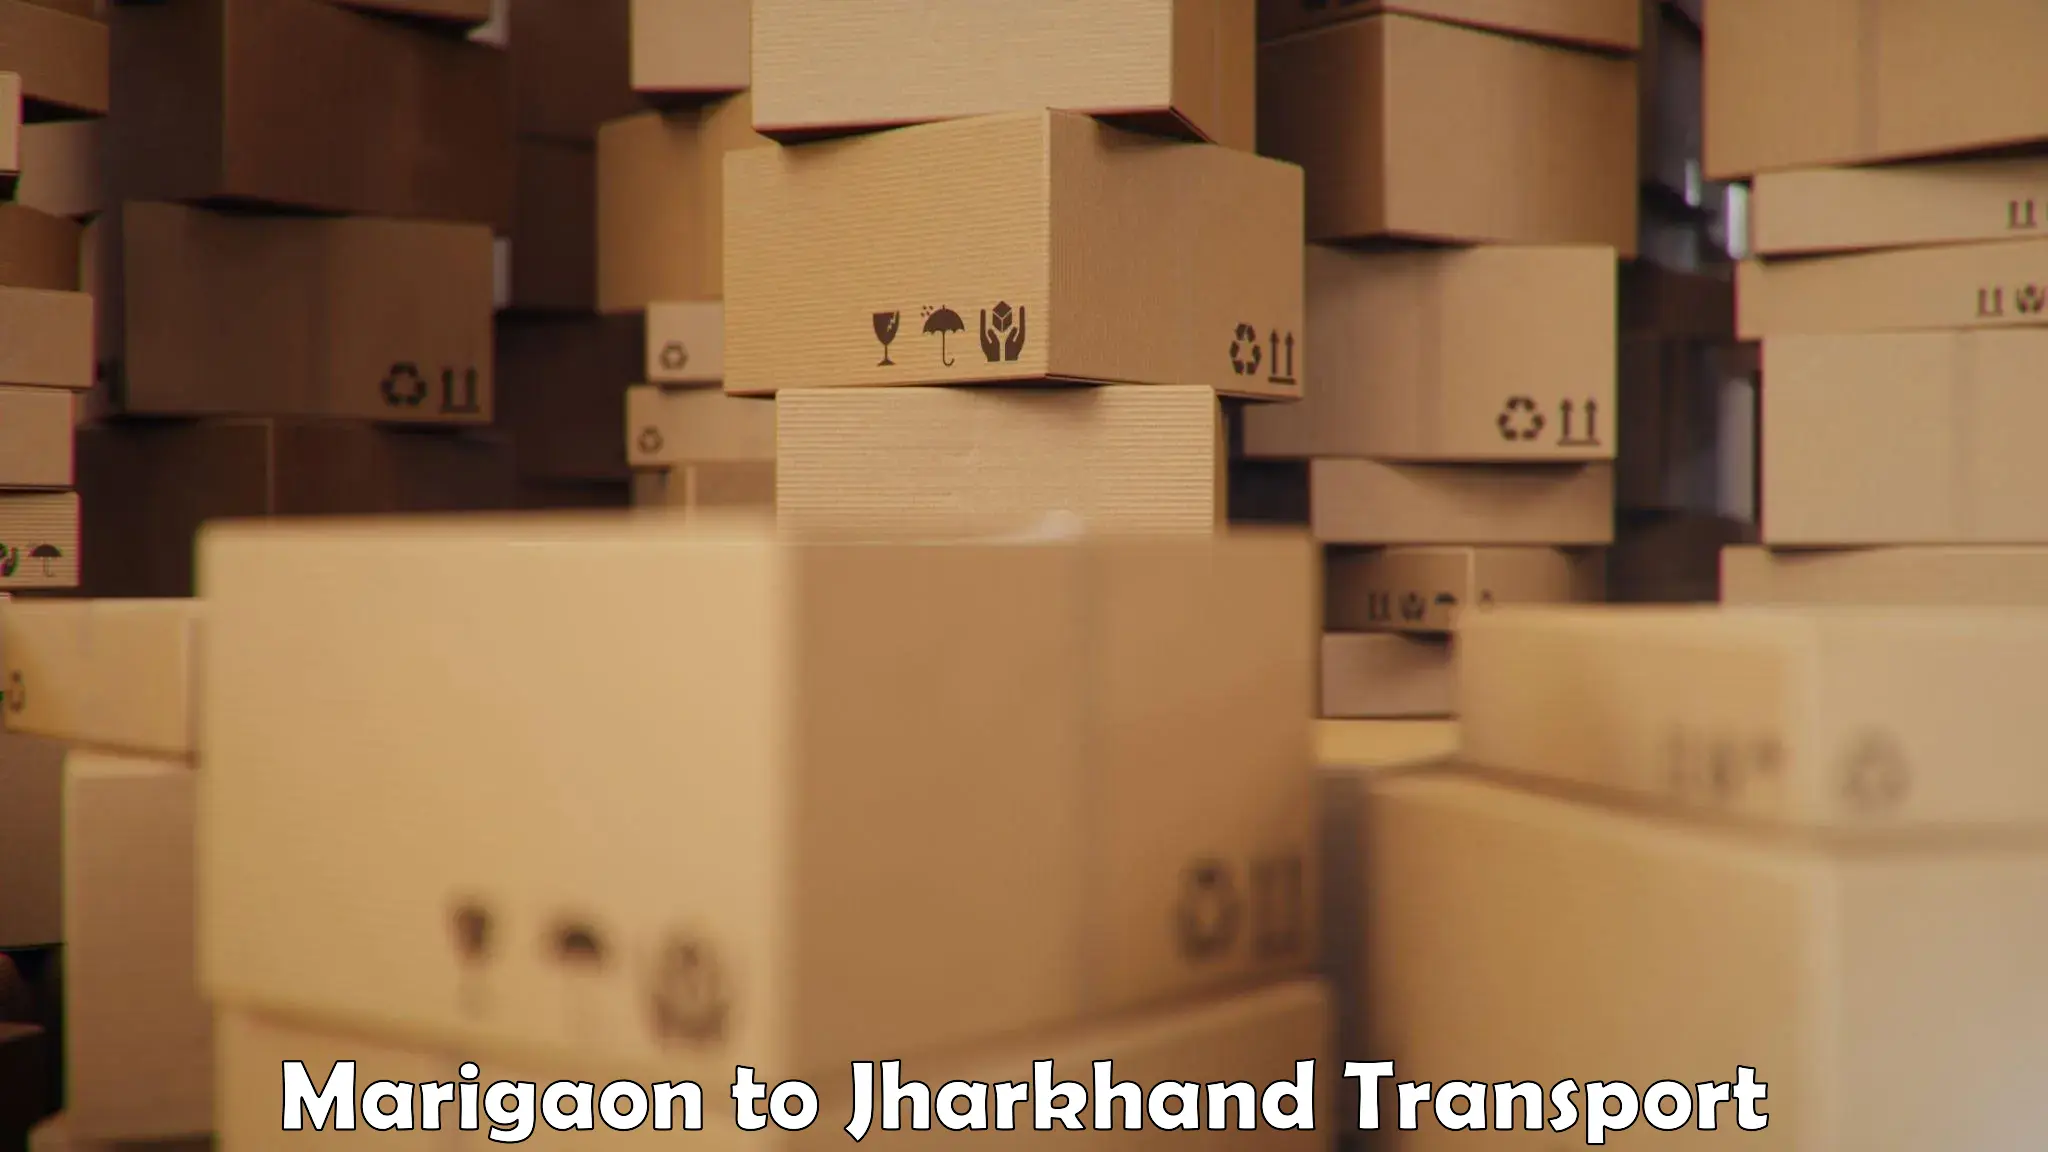 Air freight transport services in Marigaon to Jamshedpur